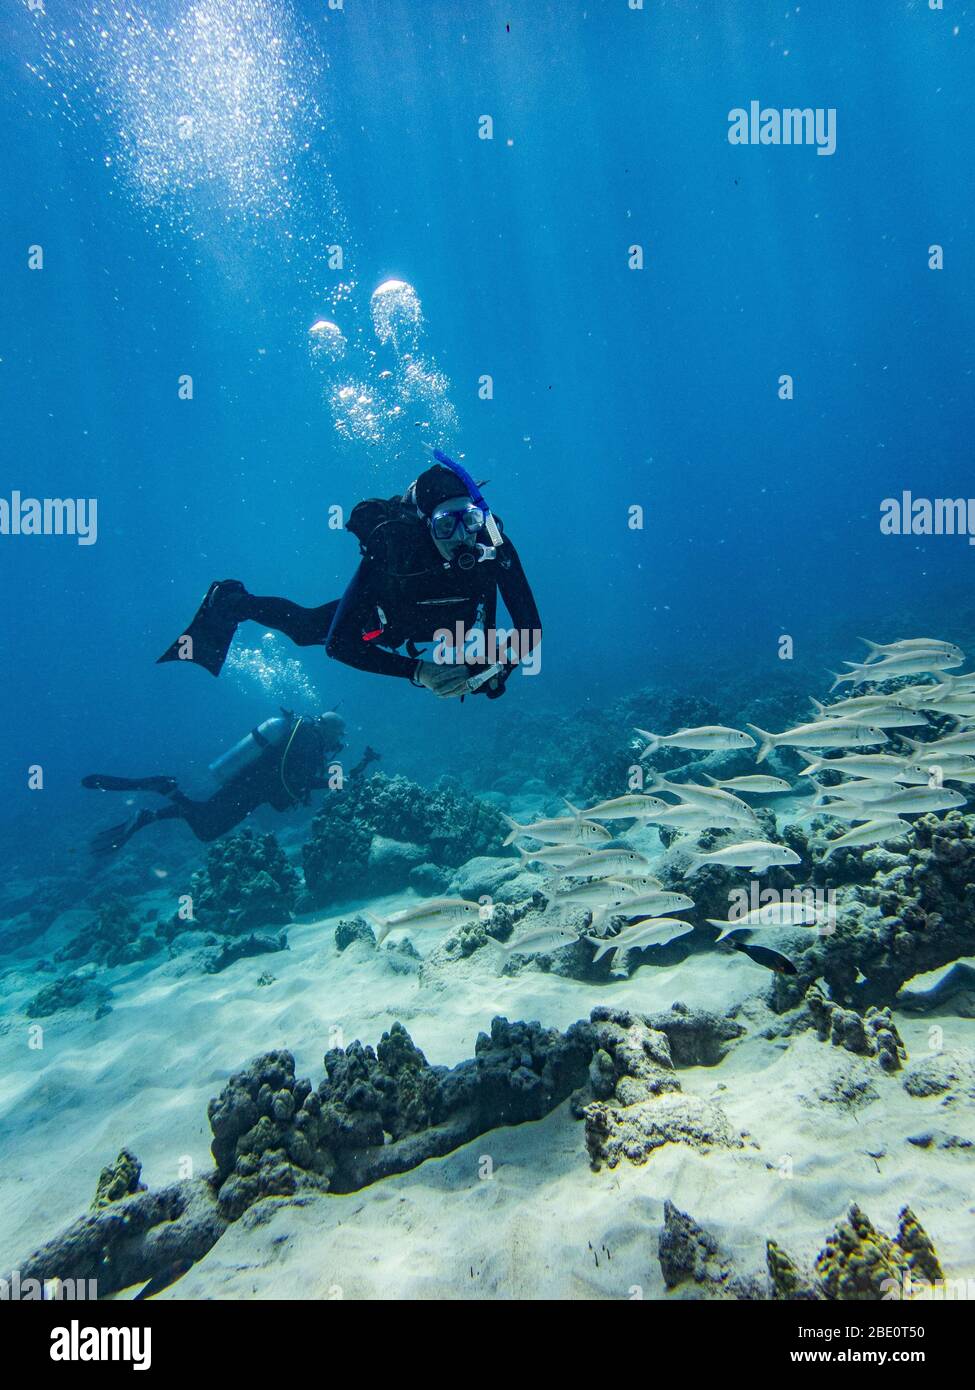 Scubadiver exploring debris on the reef at the Mahukona dive site on the Big Island of Hawaii. Stock Photo